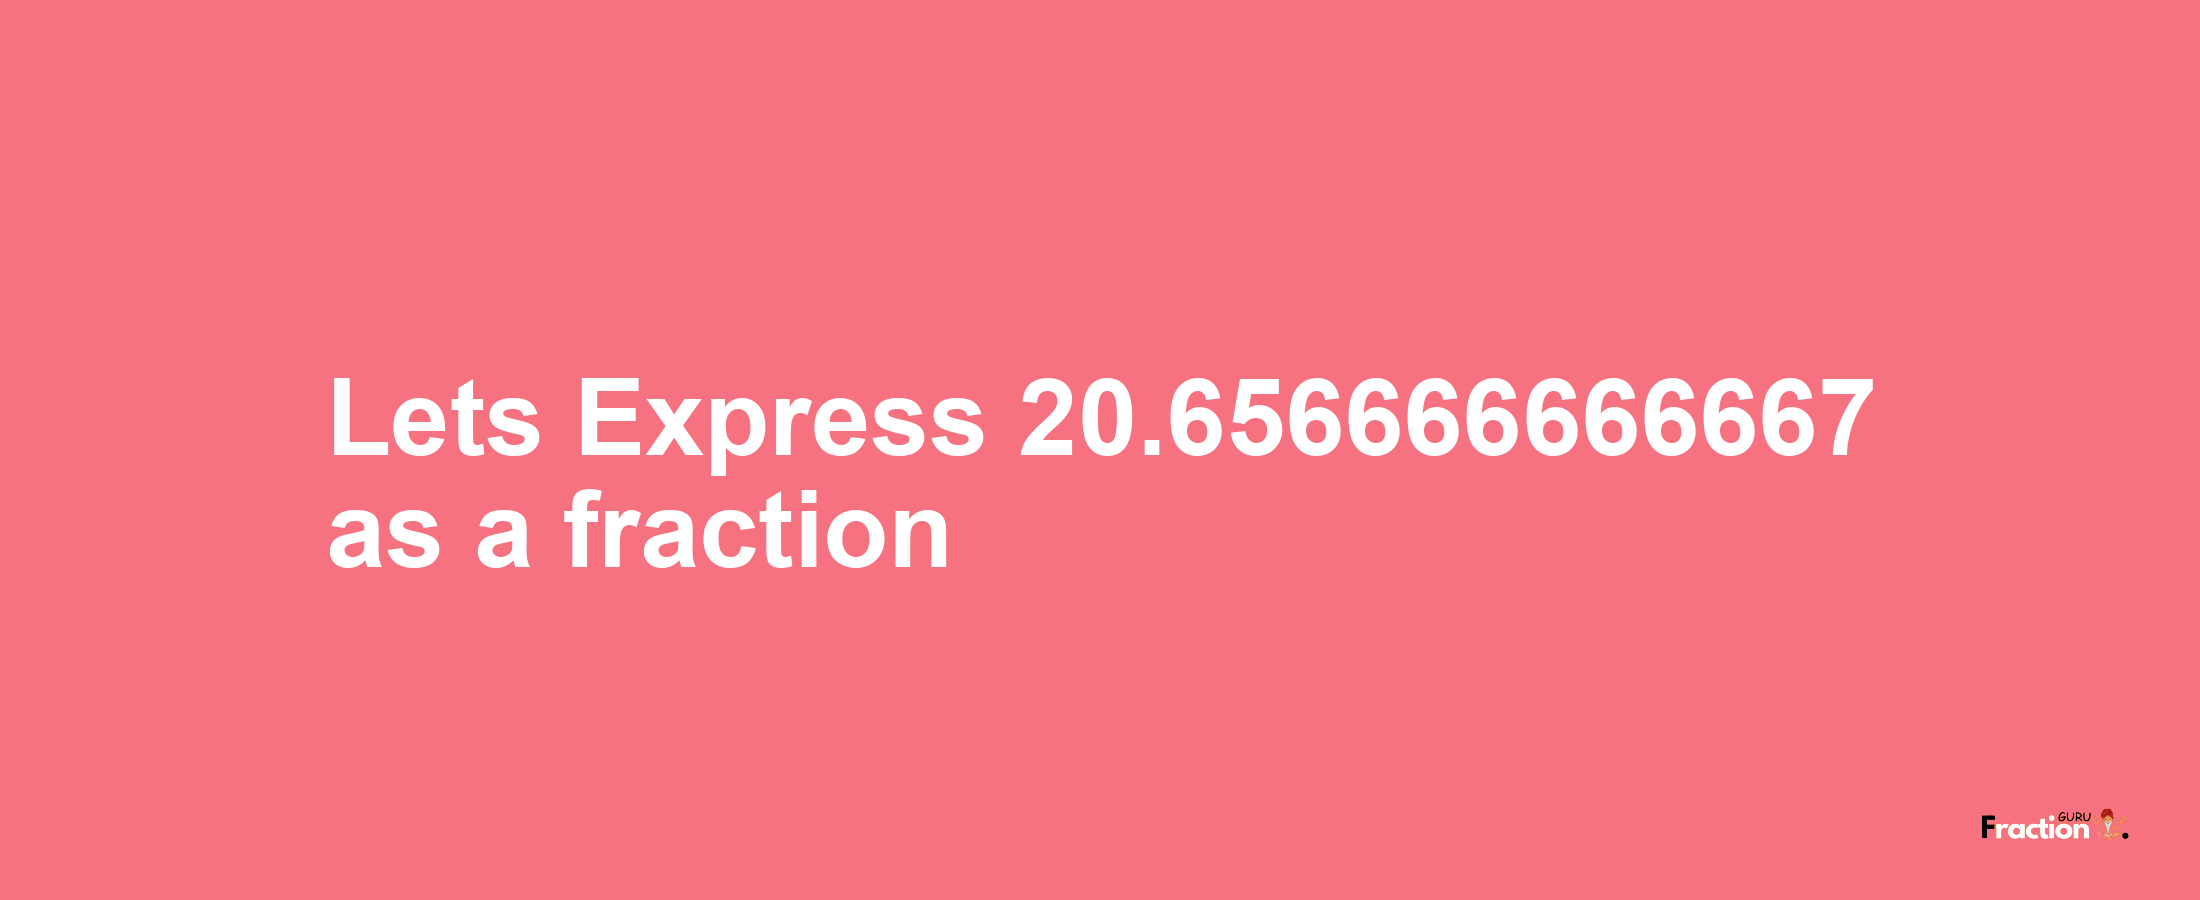 Lets Express 20.656666666667 as afraction